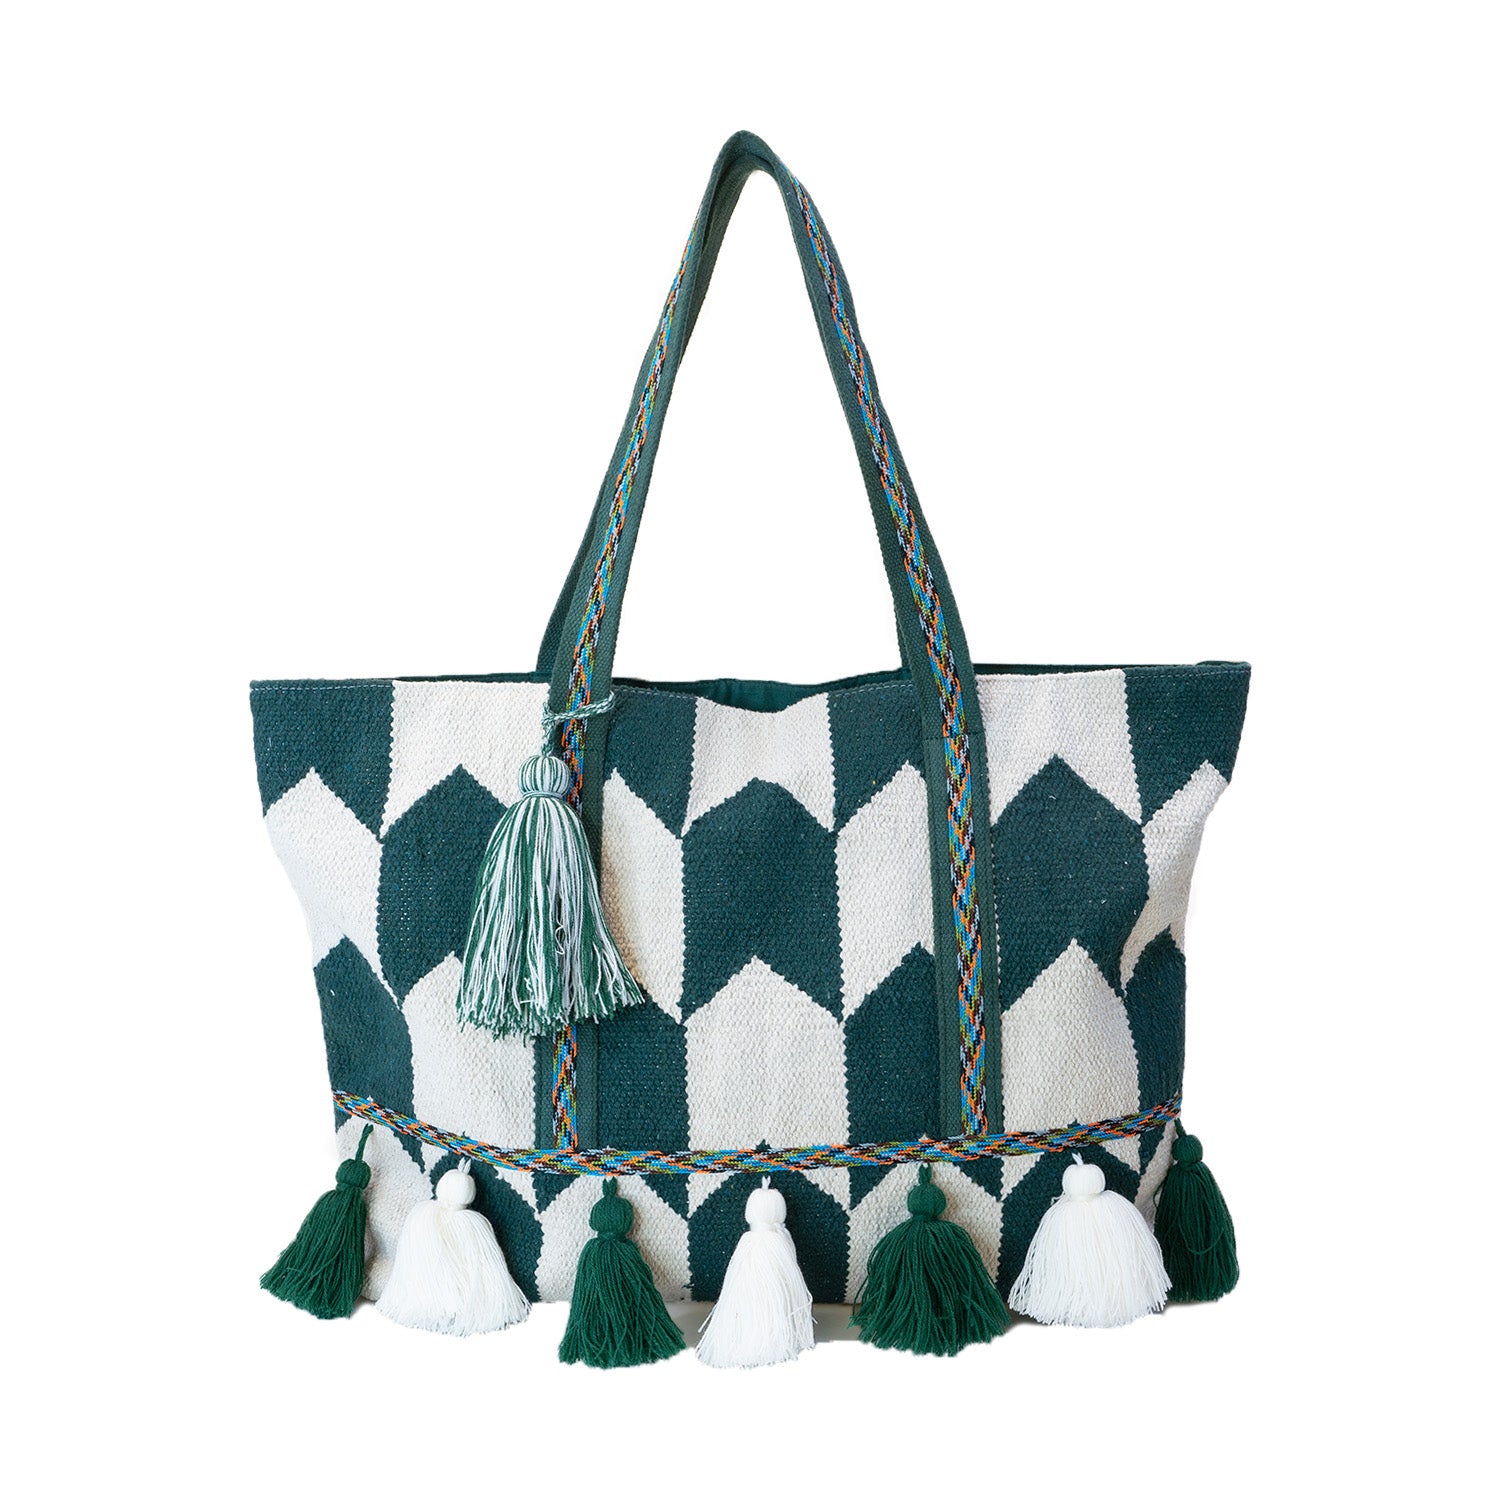 Tenley Tote with Tassels